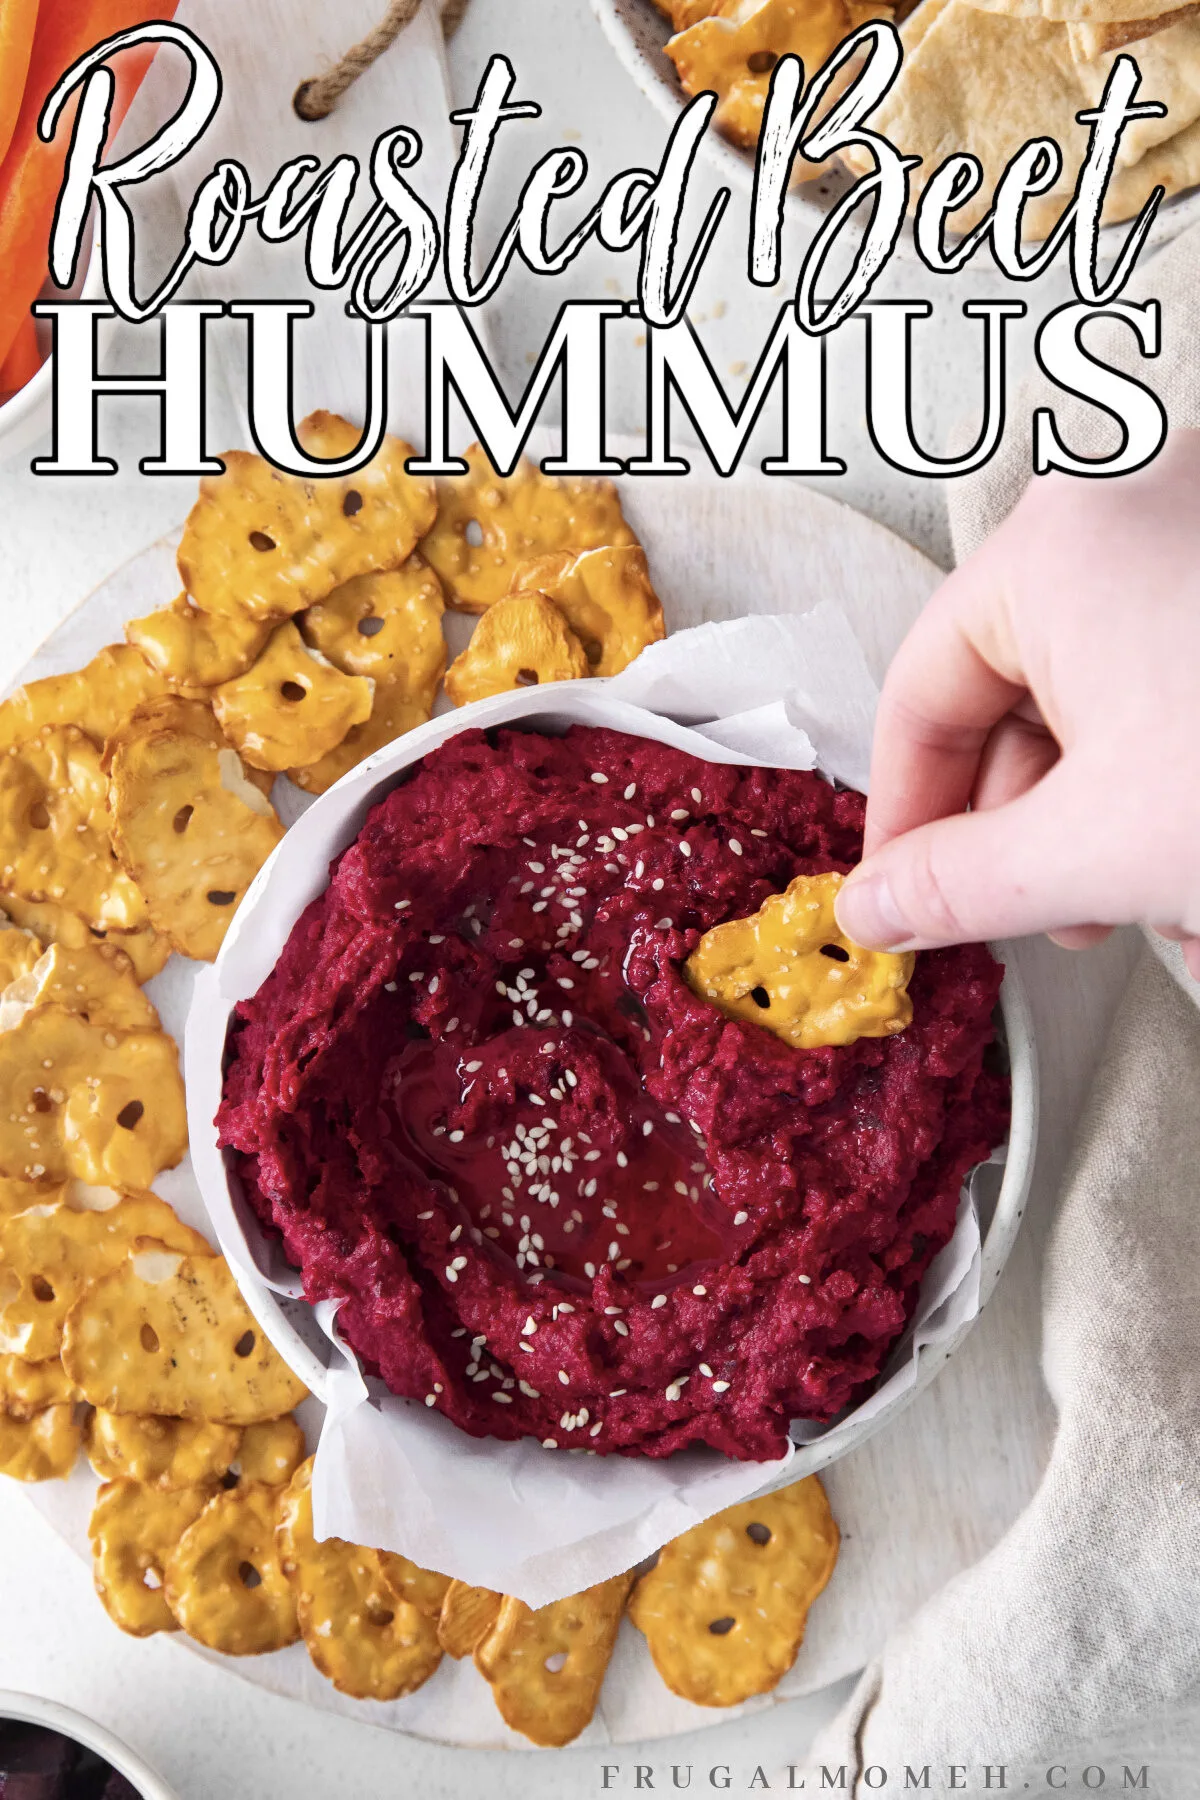 Add a twist to your hummus with this roasted beet hummus recipe! A vegetable-based dip that's dairy-free, gluten-free and vegan.